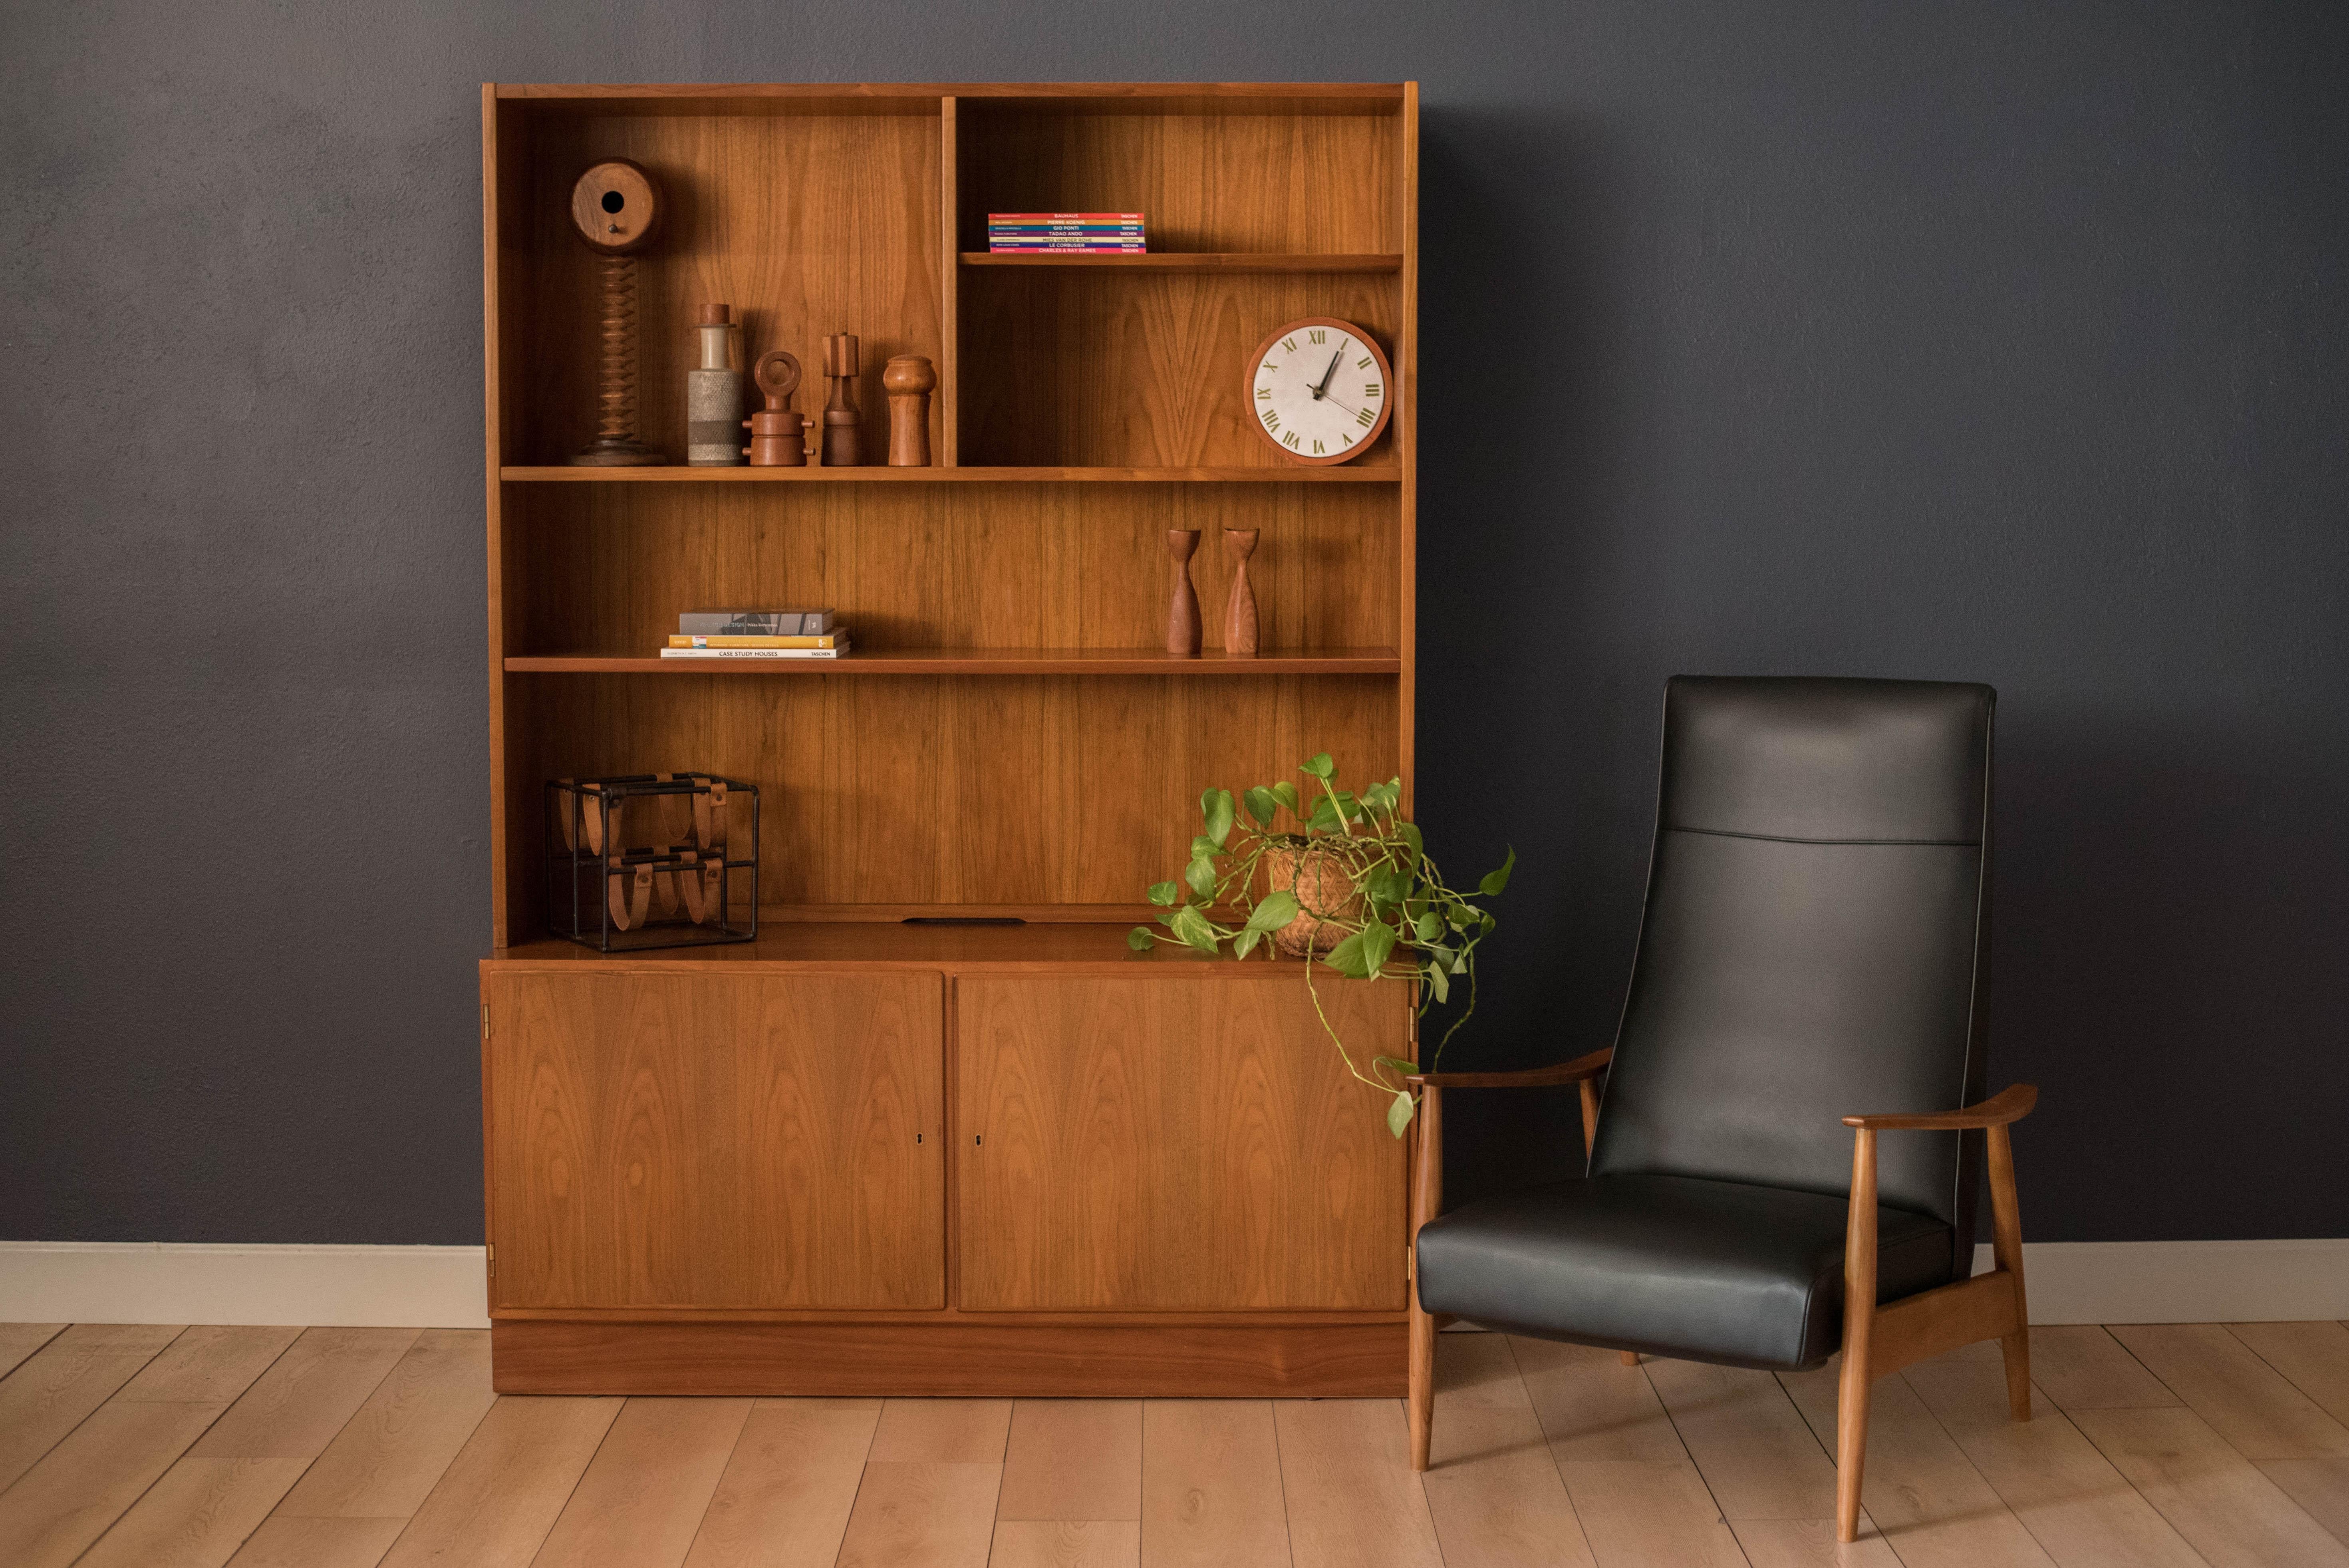 Mid-Century Modern bookcase and cabinet designed by Carlo Jensen for Hundevad & Co. in teak. This cabinet features double locking doors that reveal three drawers and open storage space with adjustable shelving. Bookshelf display easily detaches from